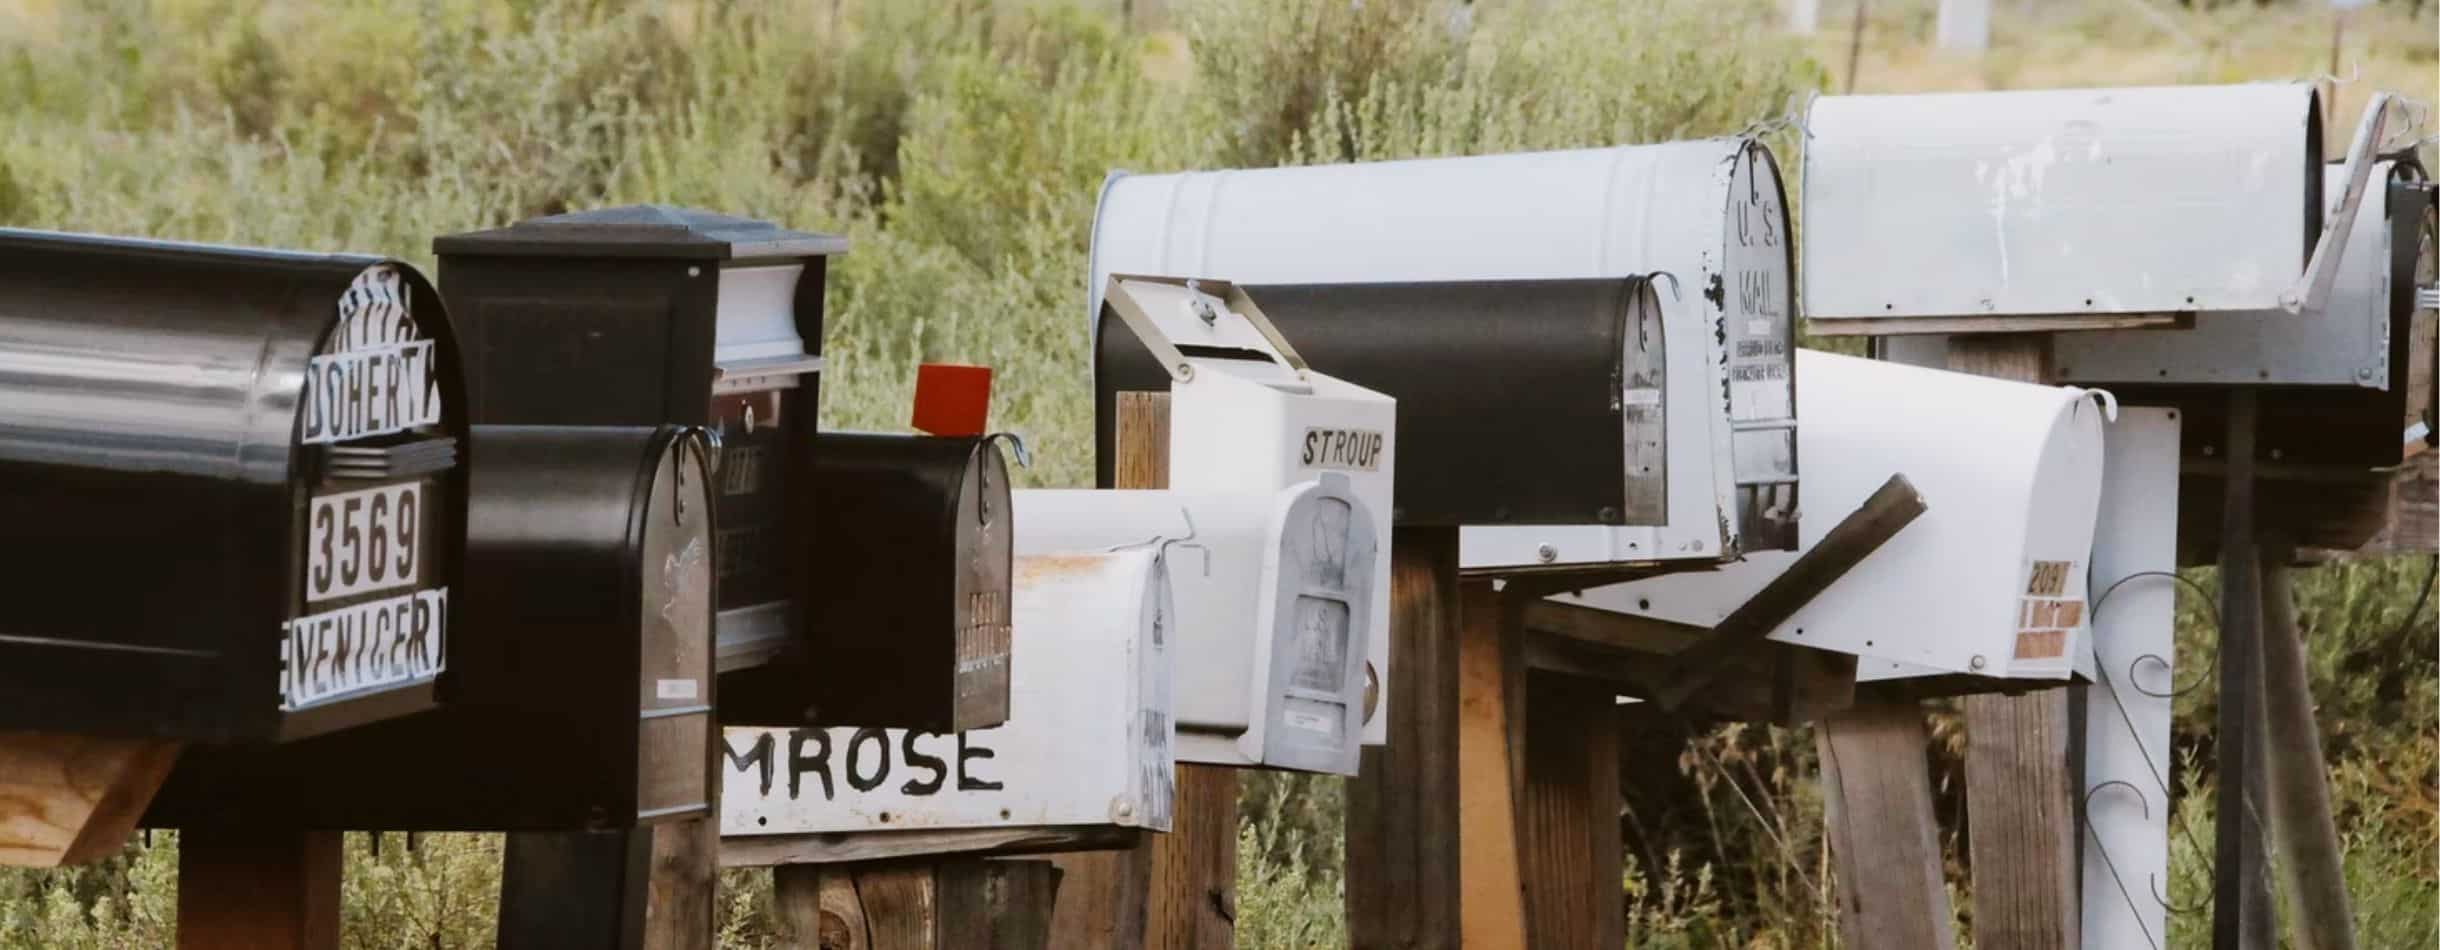 Several mailboxes all lined up next to a road.